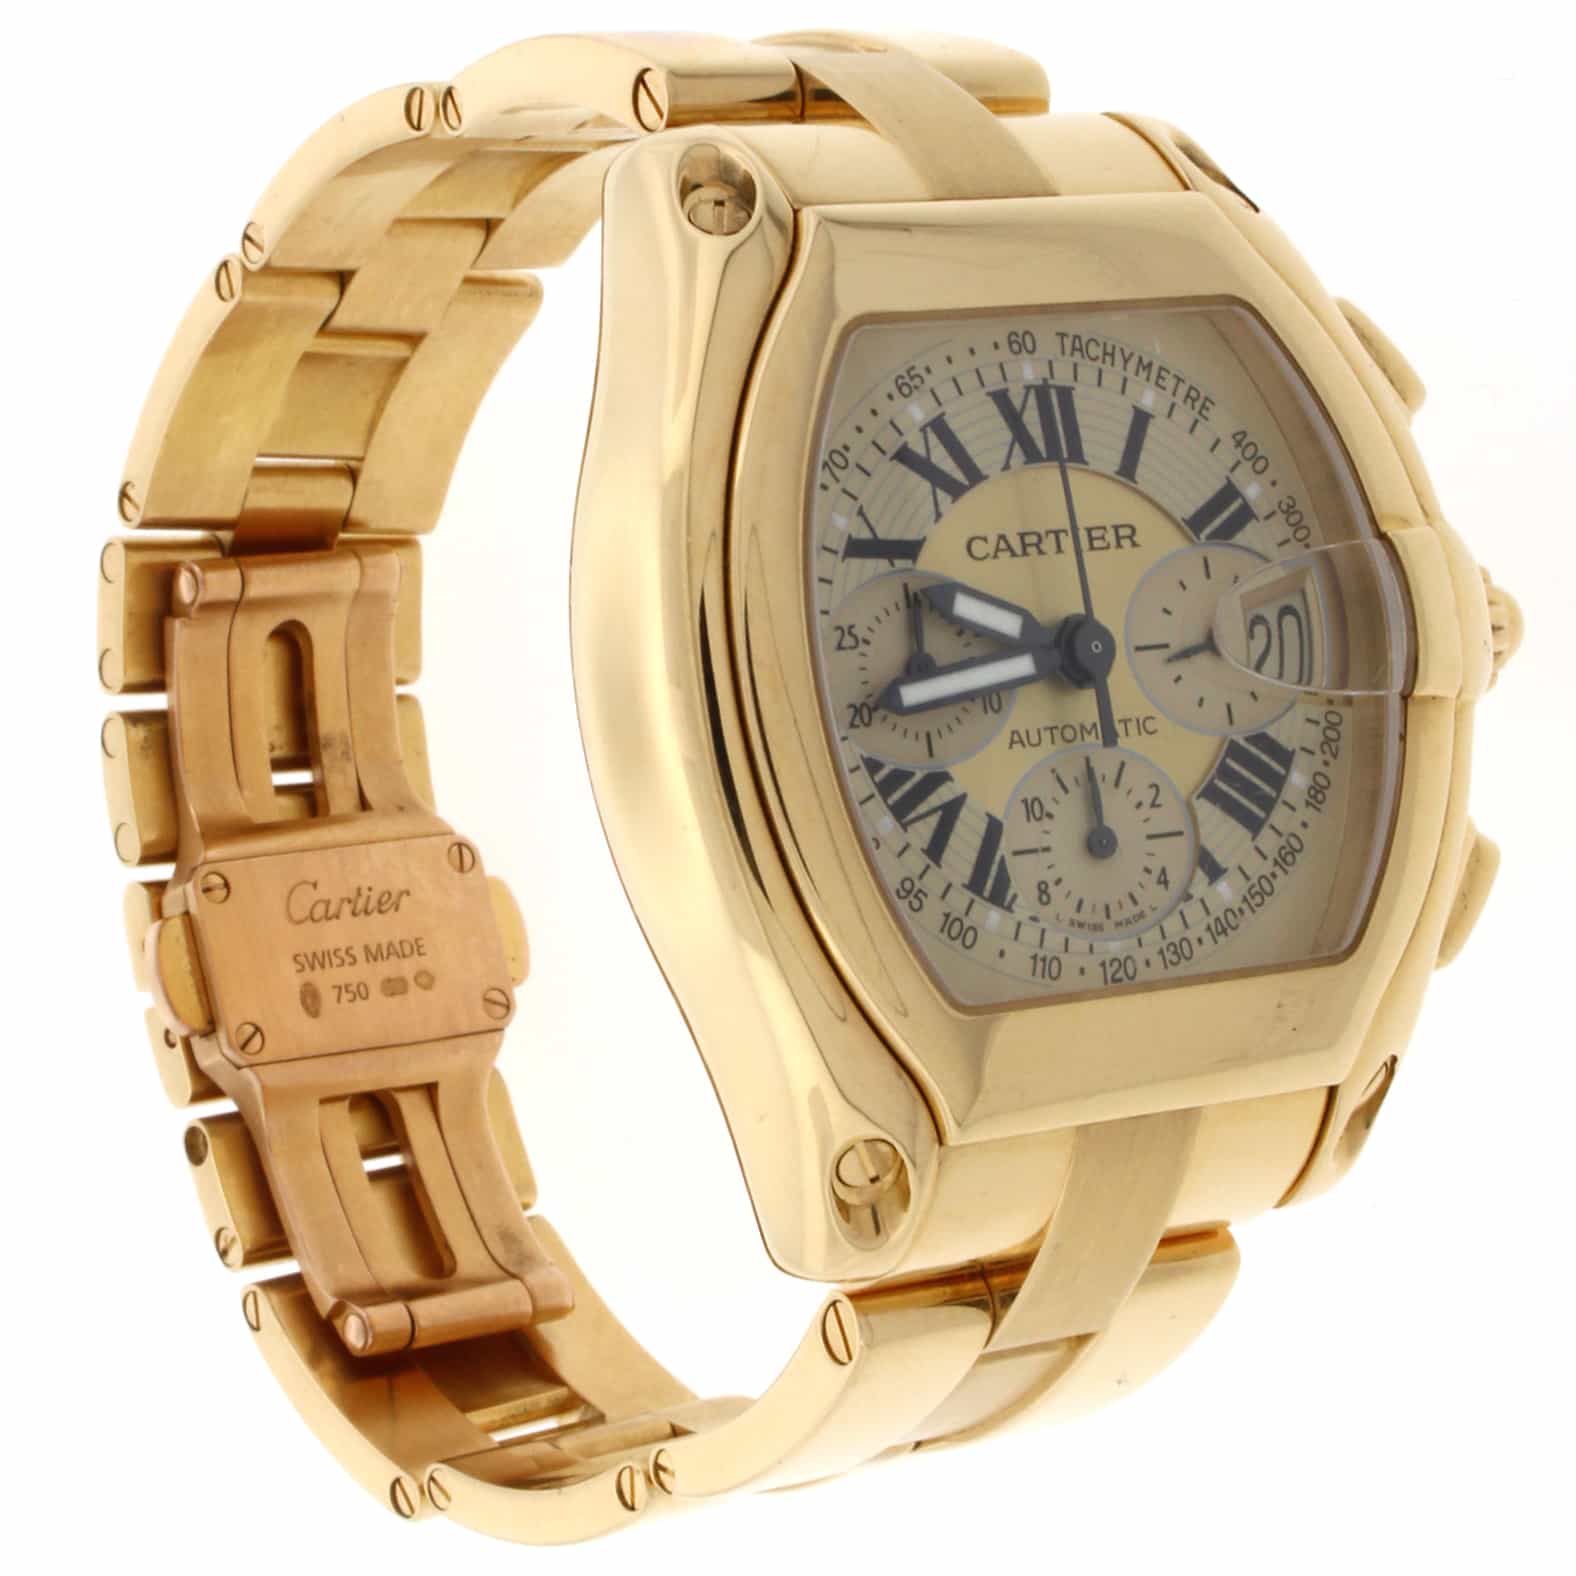 Cartier Roadster XL Chronograph 18K Yellow Gold Automatic Mens Watch 2 ...